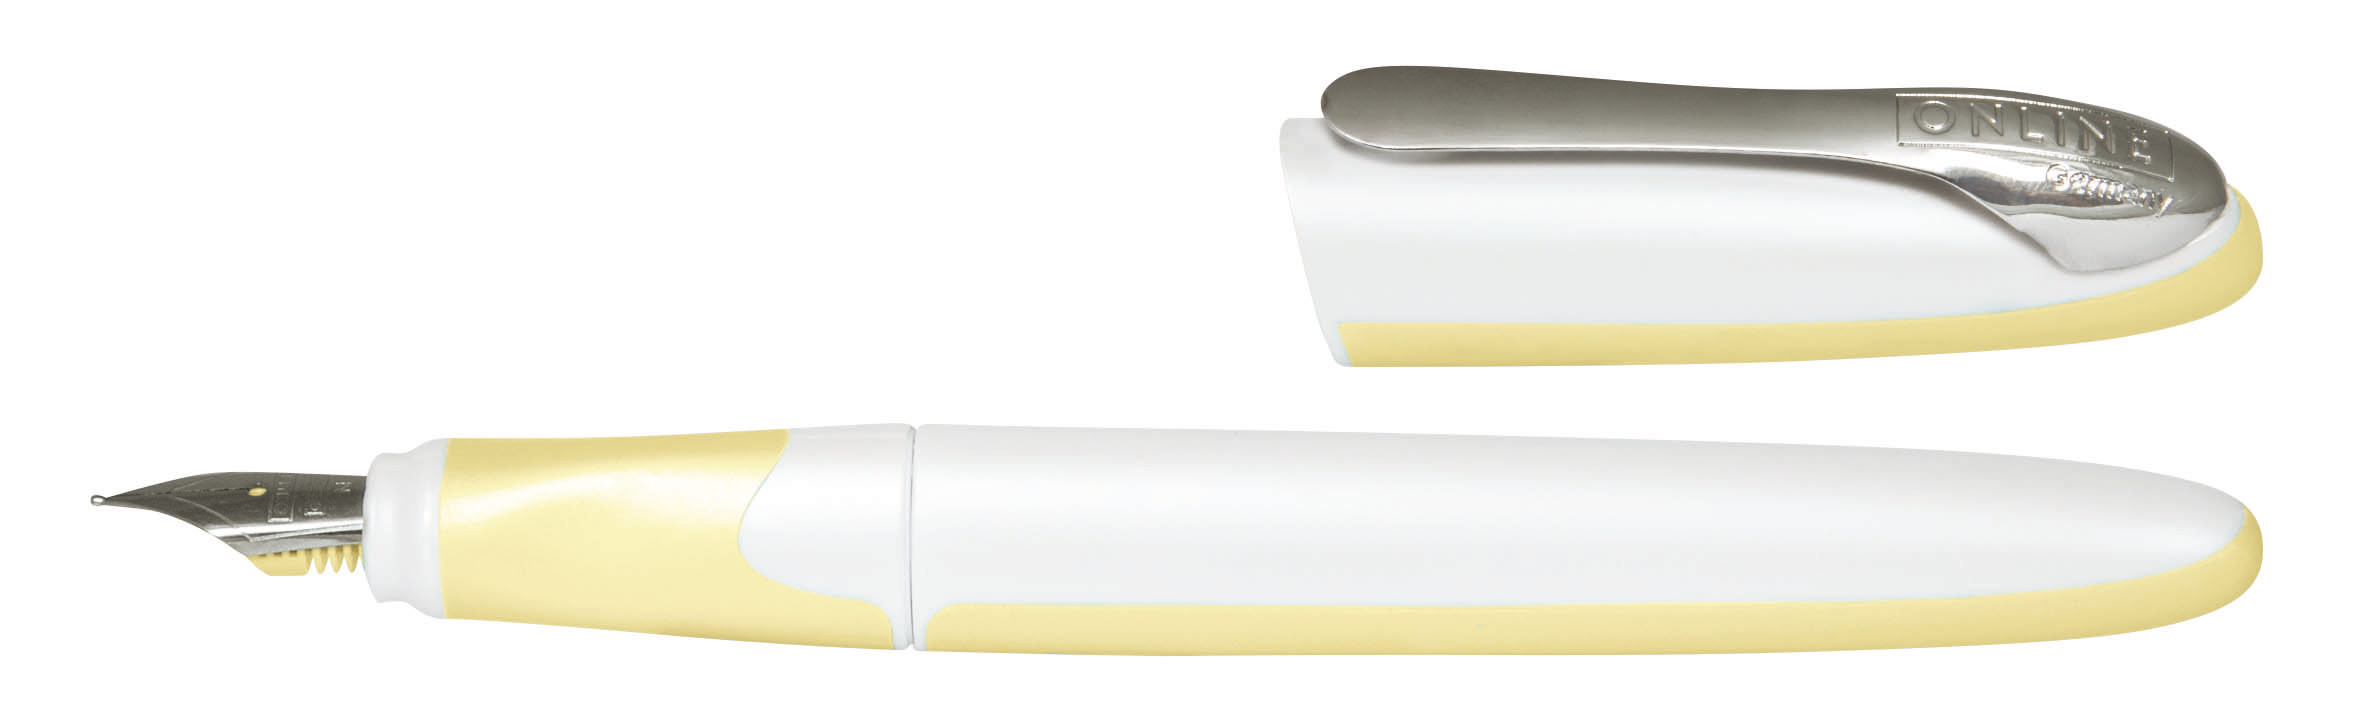 ONLINE Stylo plume Air 0.5mm 20140/3D Pastel Yellow Pastel Yellow